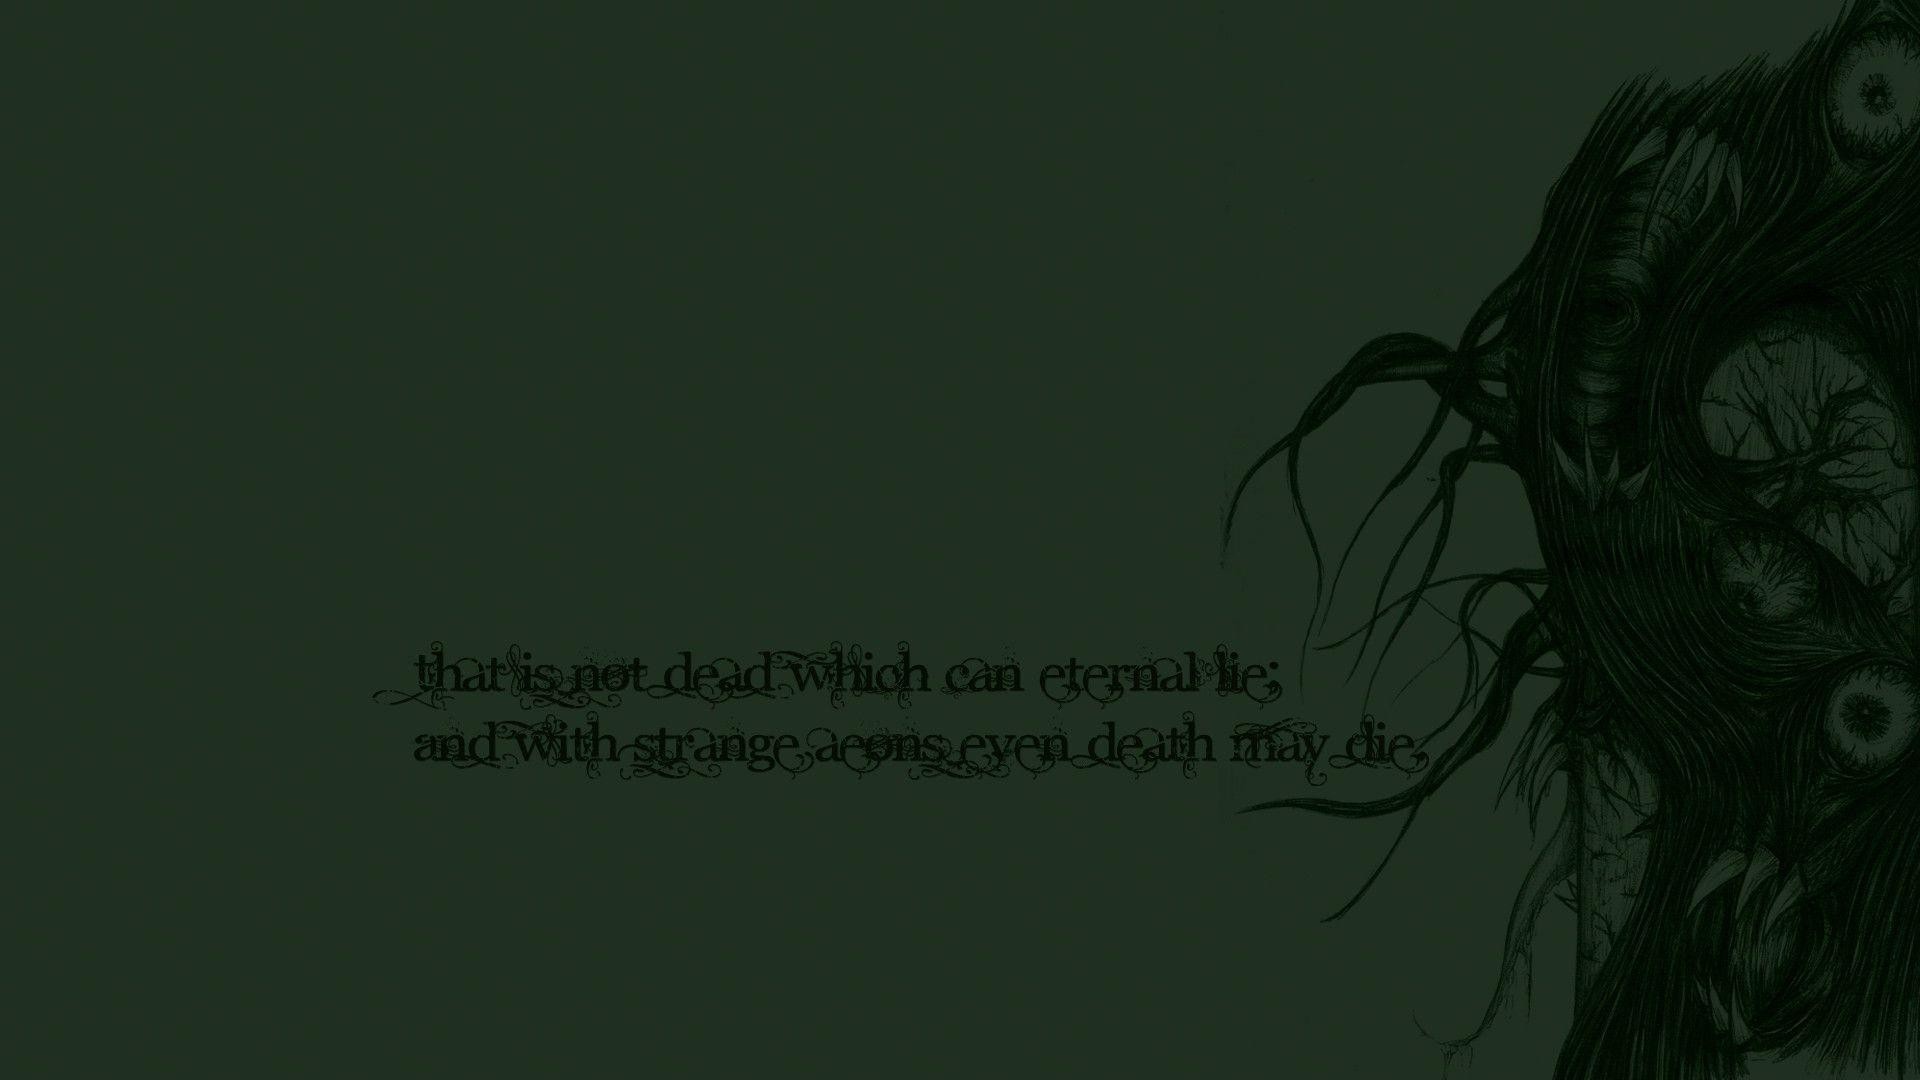 1920x1080 Hp Wallpaper Hd: The Images Of Cthulhu Hp Lovecraft Fresh Hd ..